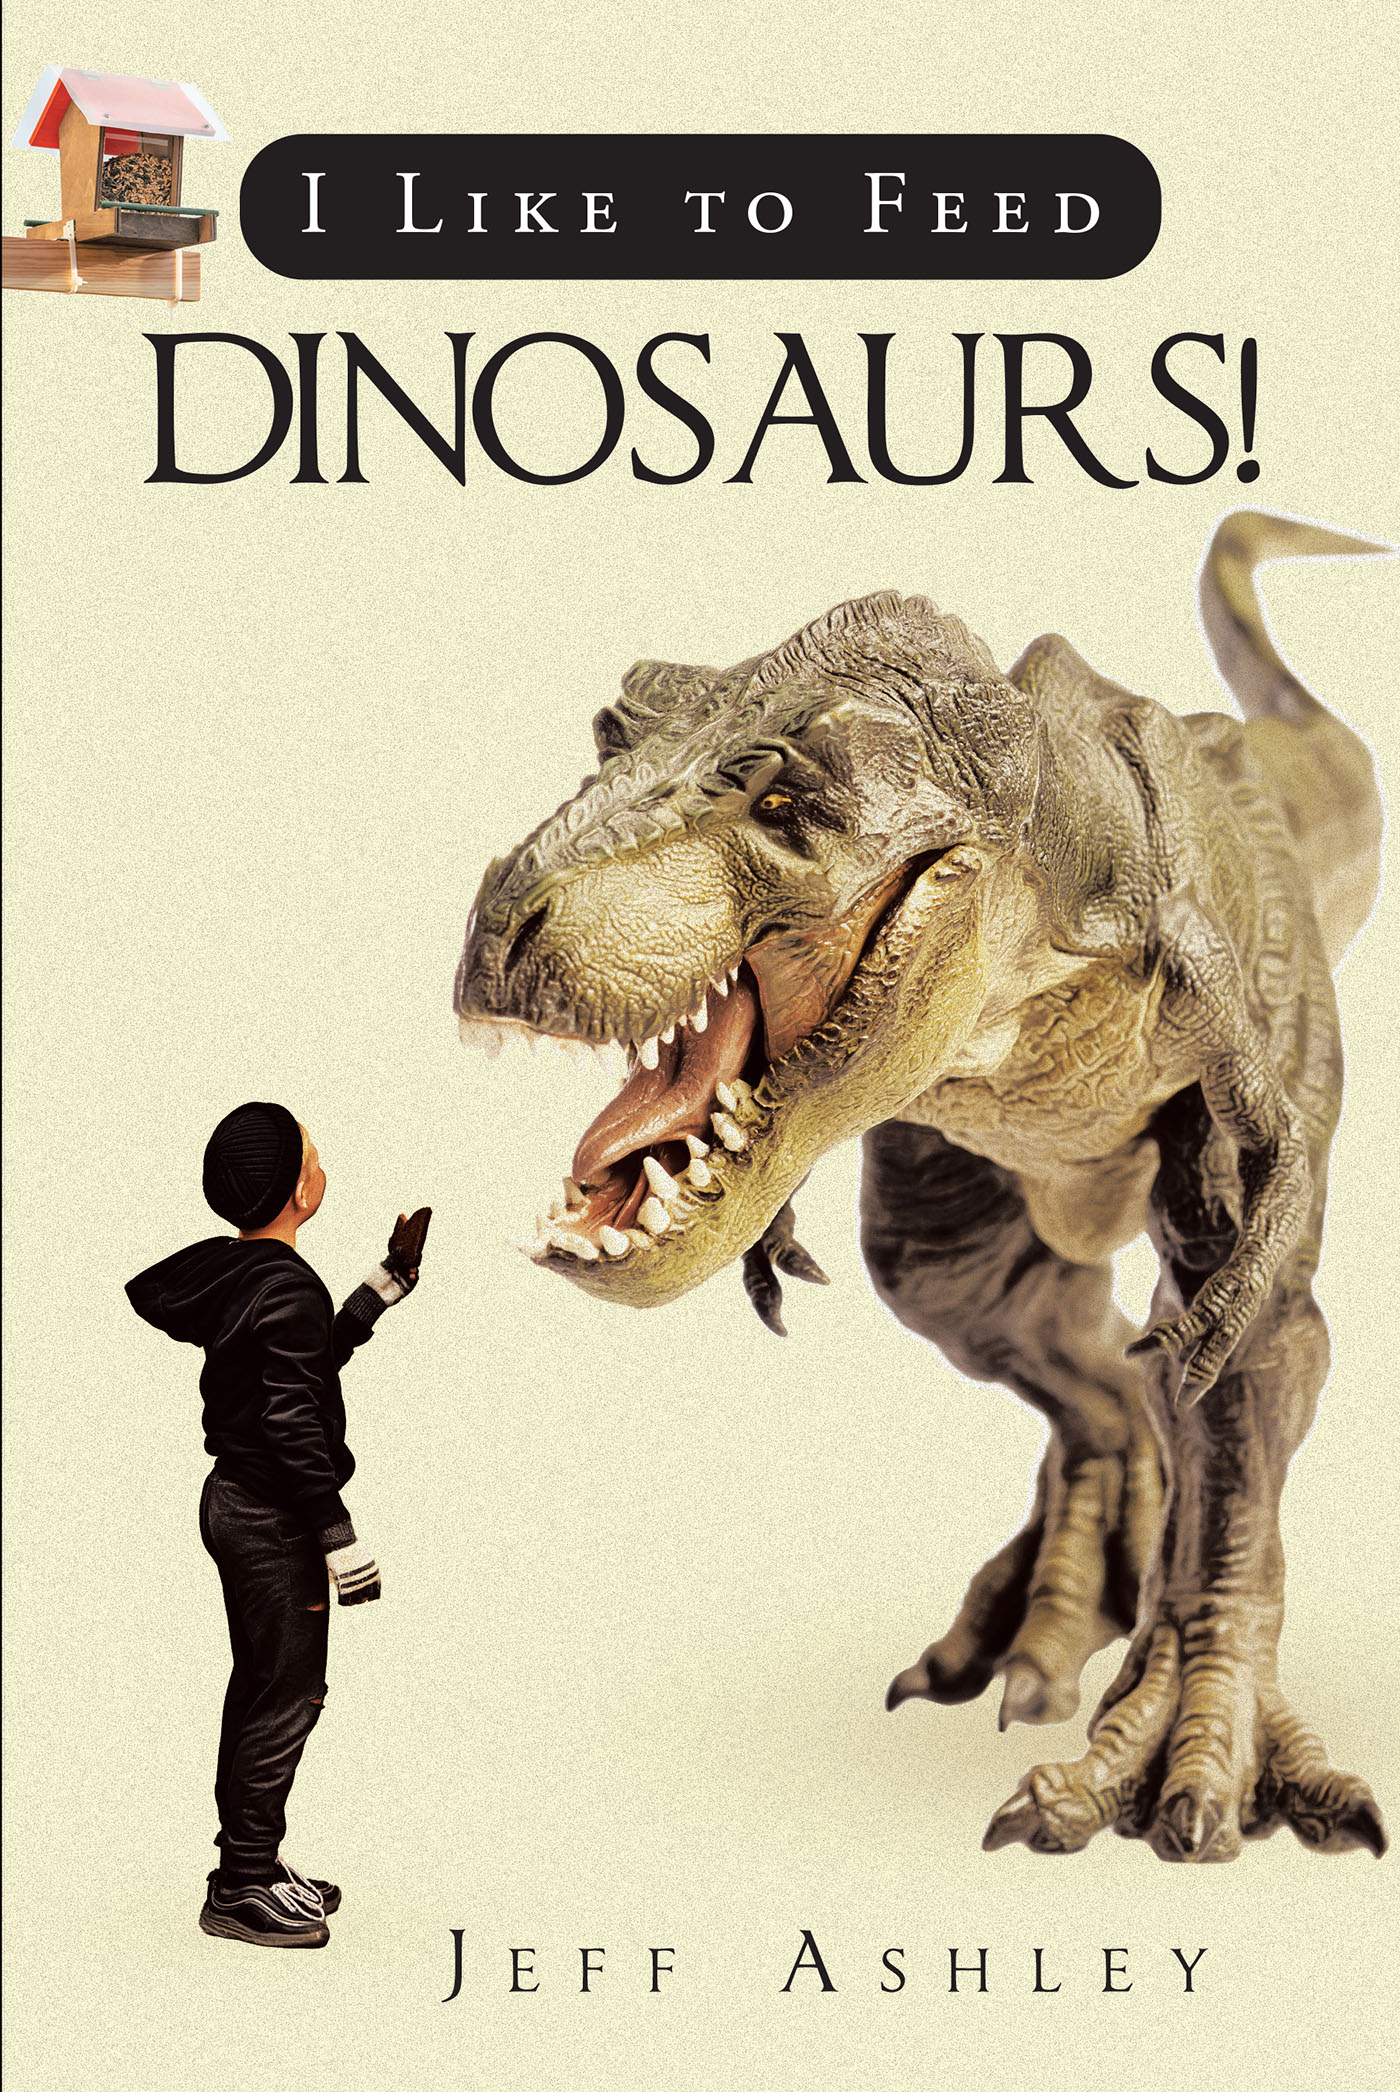 Jeff Ashley’s Newly Released "I Like to Feed Dinosaurs!" is a Thought-Provoking Discussion Against the Theory of Evolution